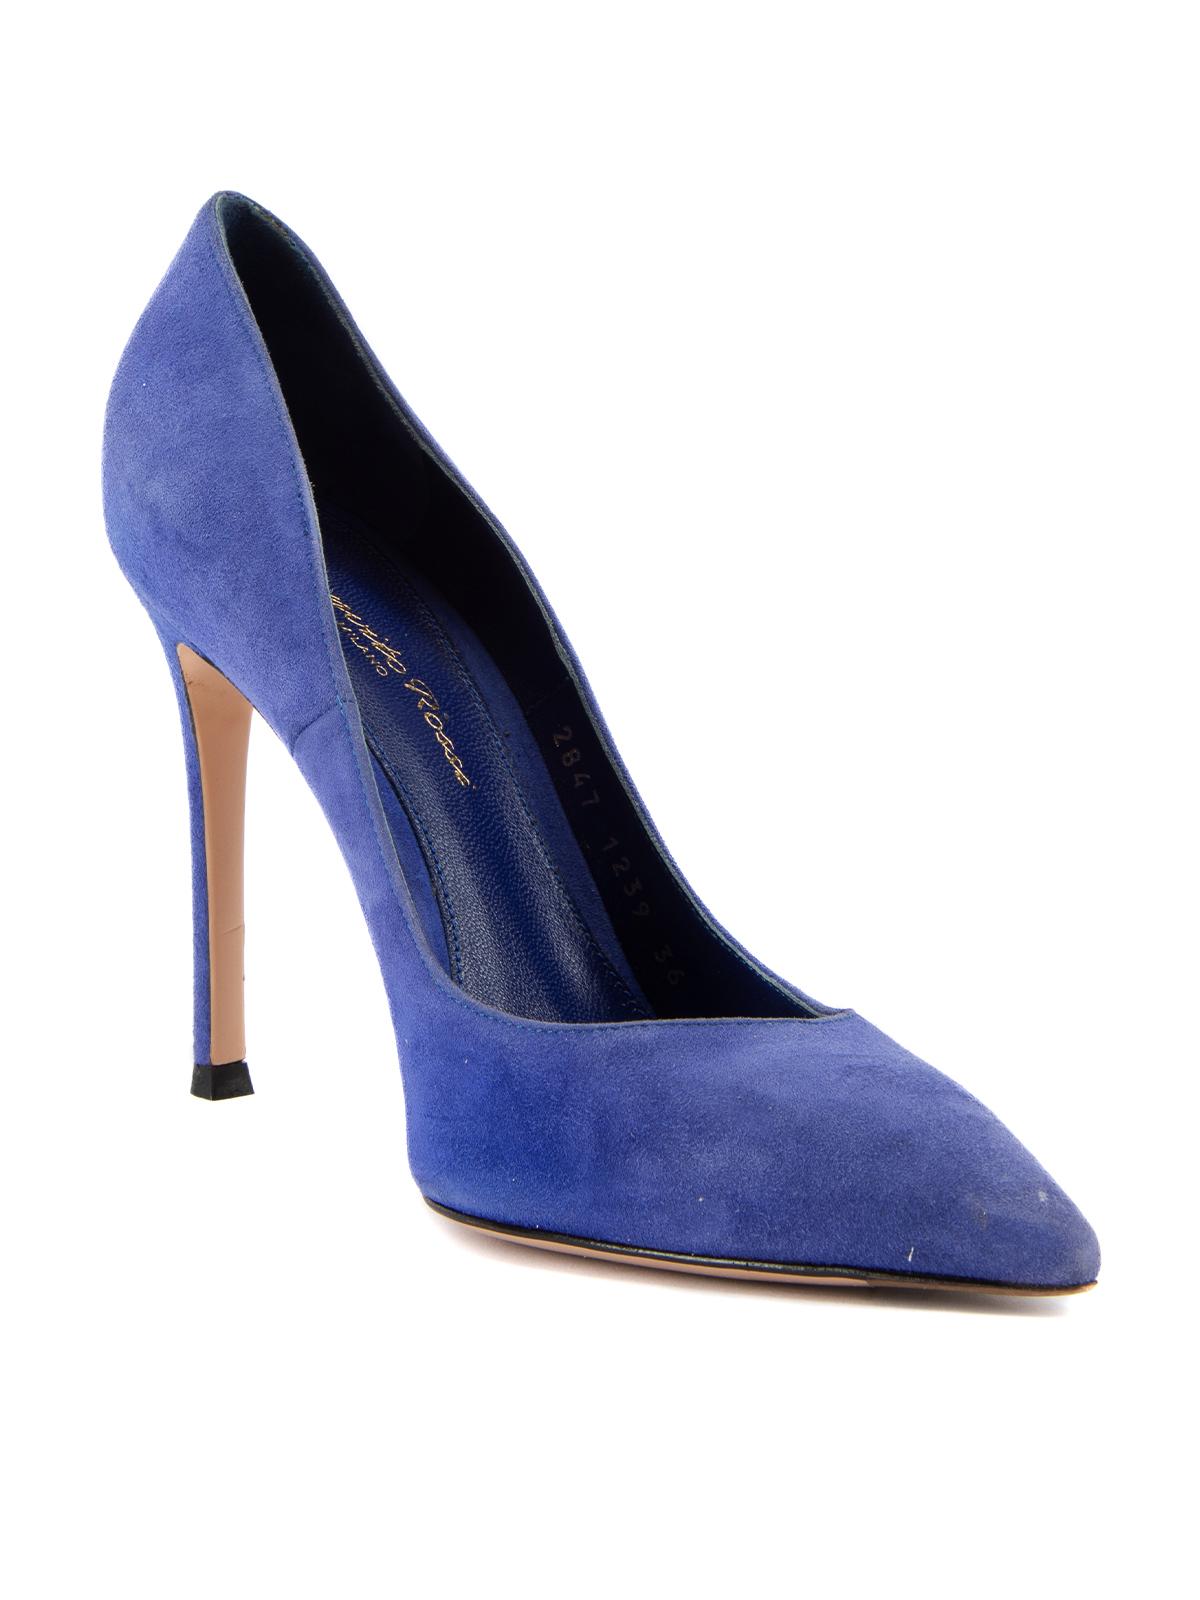 CONDITION is Good. Minor wear to heels is evident. Light wear/fading to suede exterior and minimal wear to the outsole on this used Gianvitto Rossi designer resale item. Details Indigo Suede Slip on heels Pointed toe Stiletto heel Made in Italy